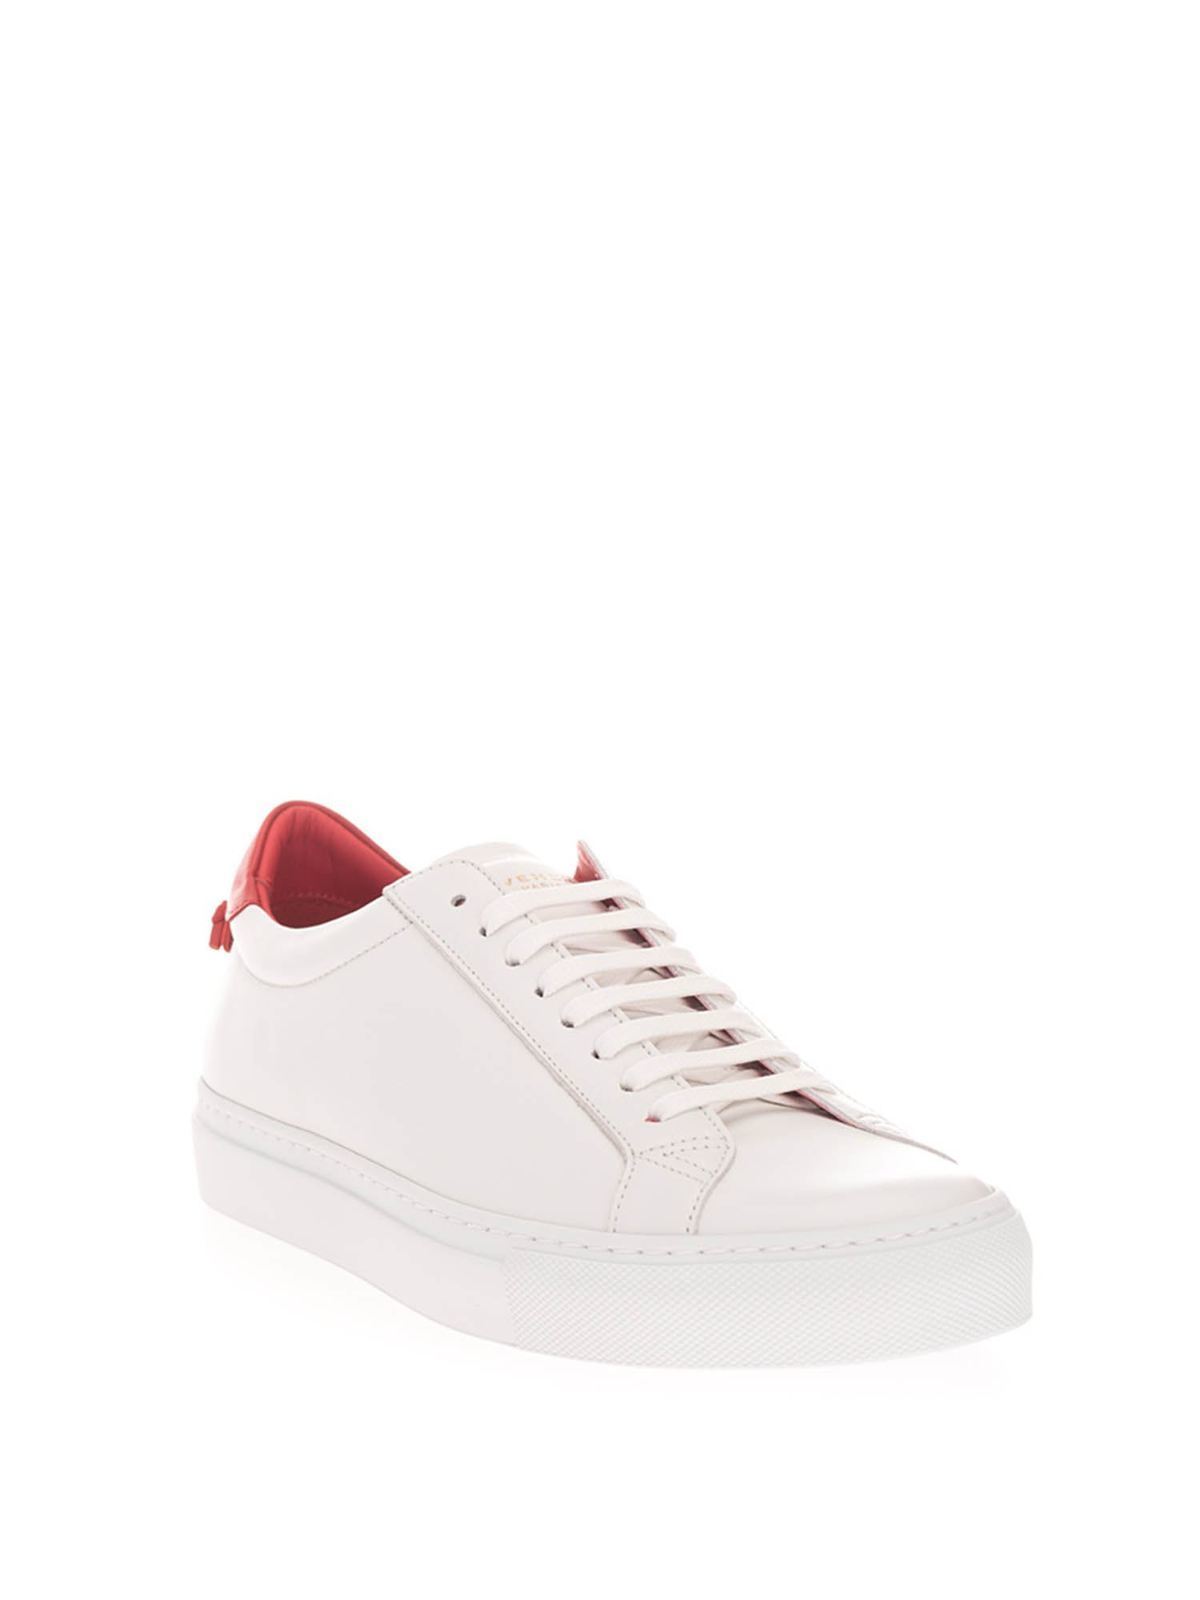 givenchy red and white sneakers